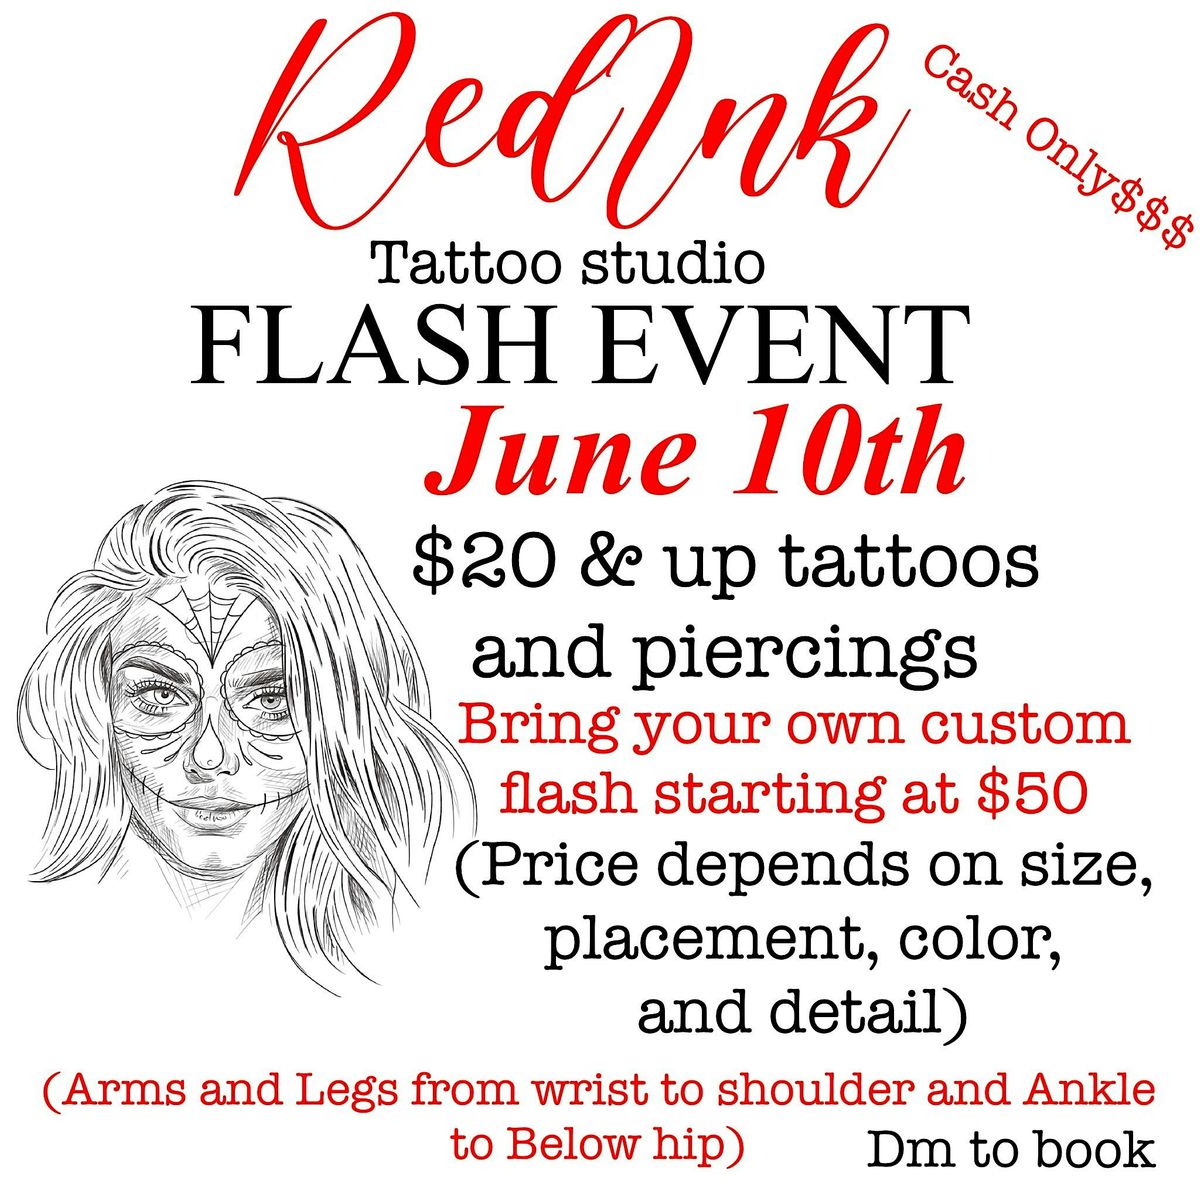 FLASH $20 $35 AND UP TATTOOS AND PIERCINGS JUNE 10TH